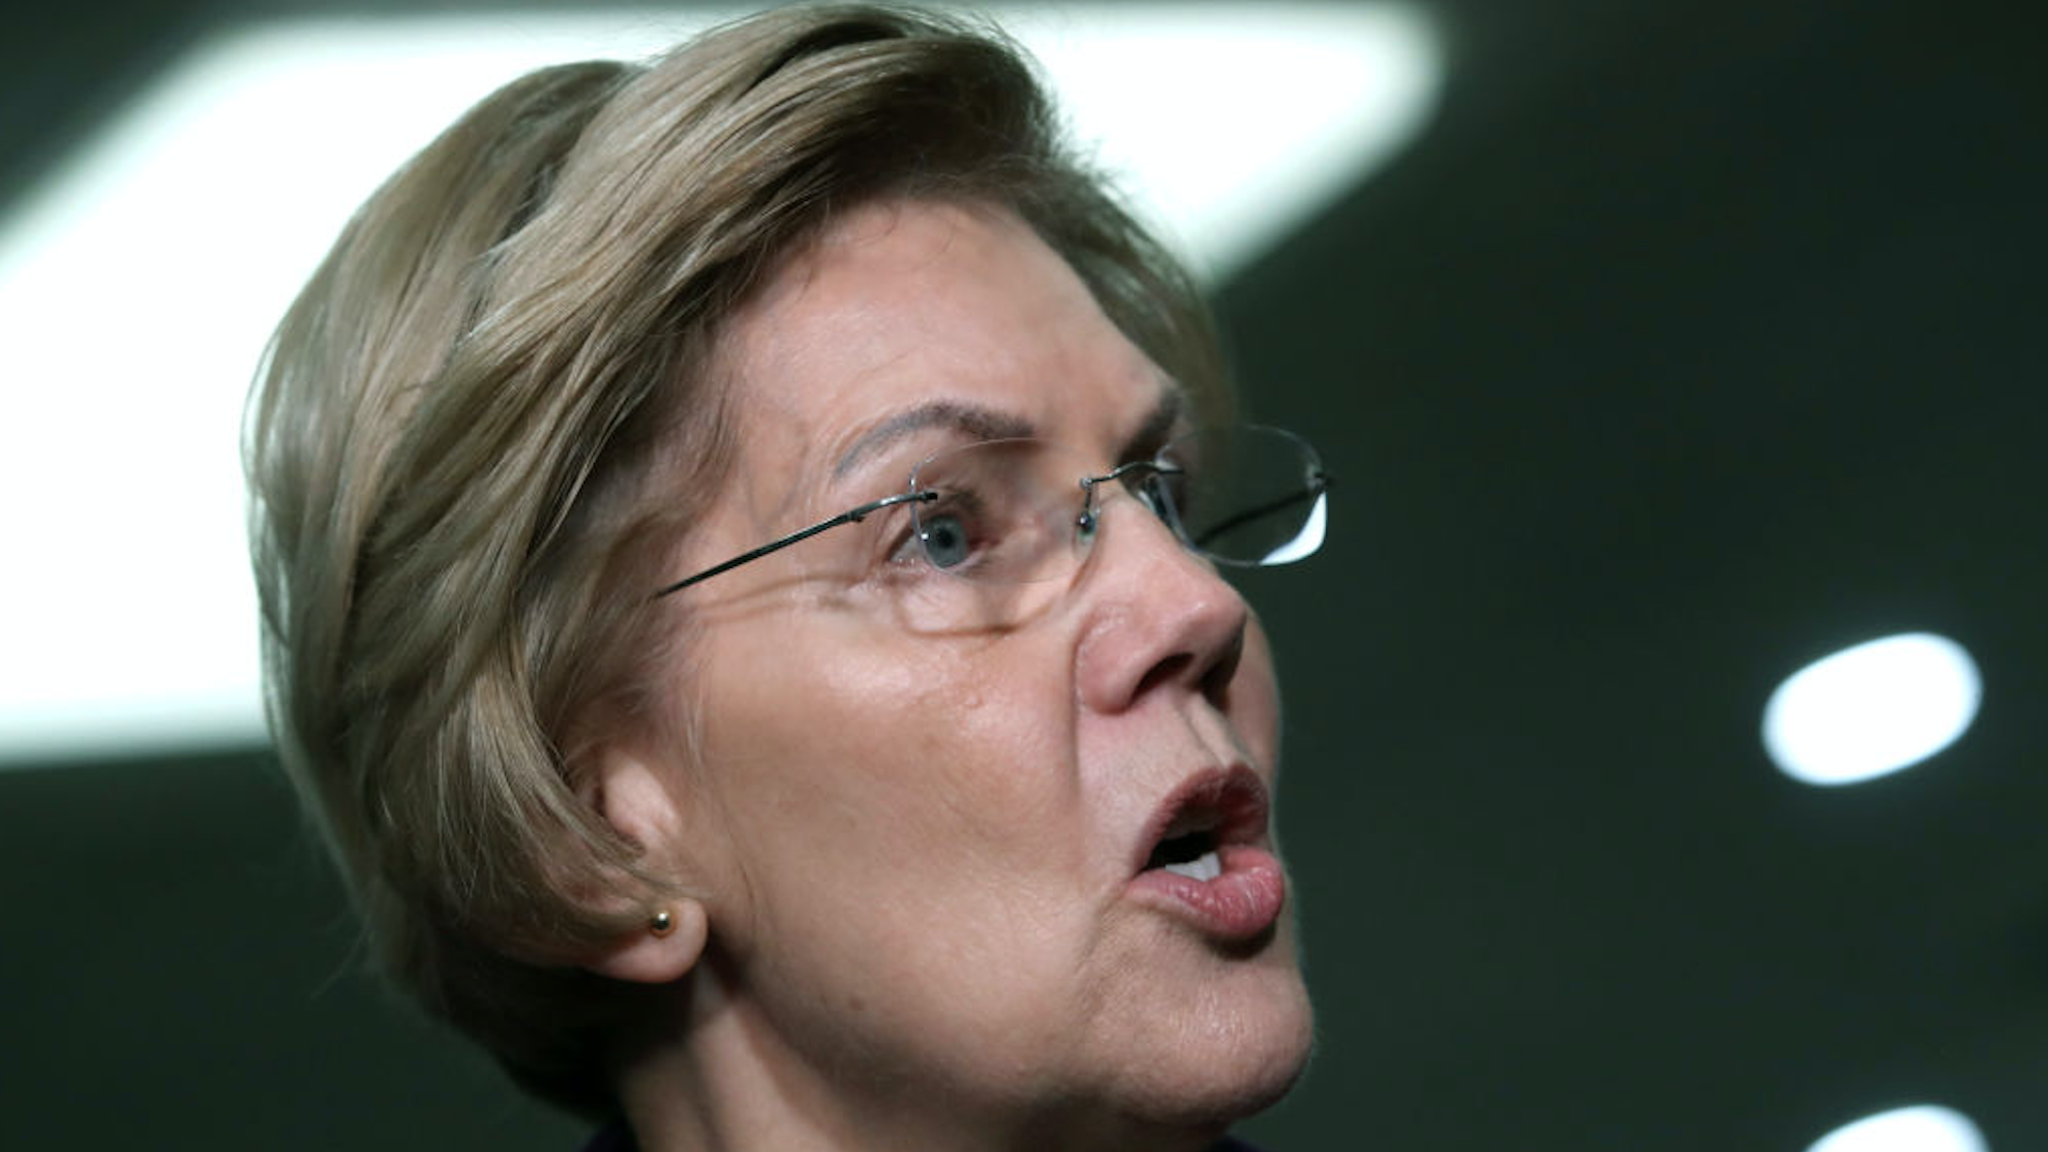 Democratic presidential candidate Sen. Elizabeth Warren (D-MA) speaks to the media as the Senate impeachment trial Of President Donald Trump continues at the U.S. Capitol on January 23, 2020 in Washington, DC.